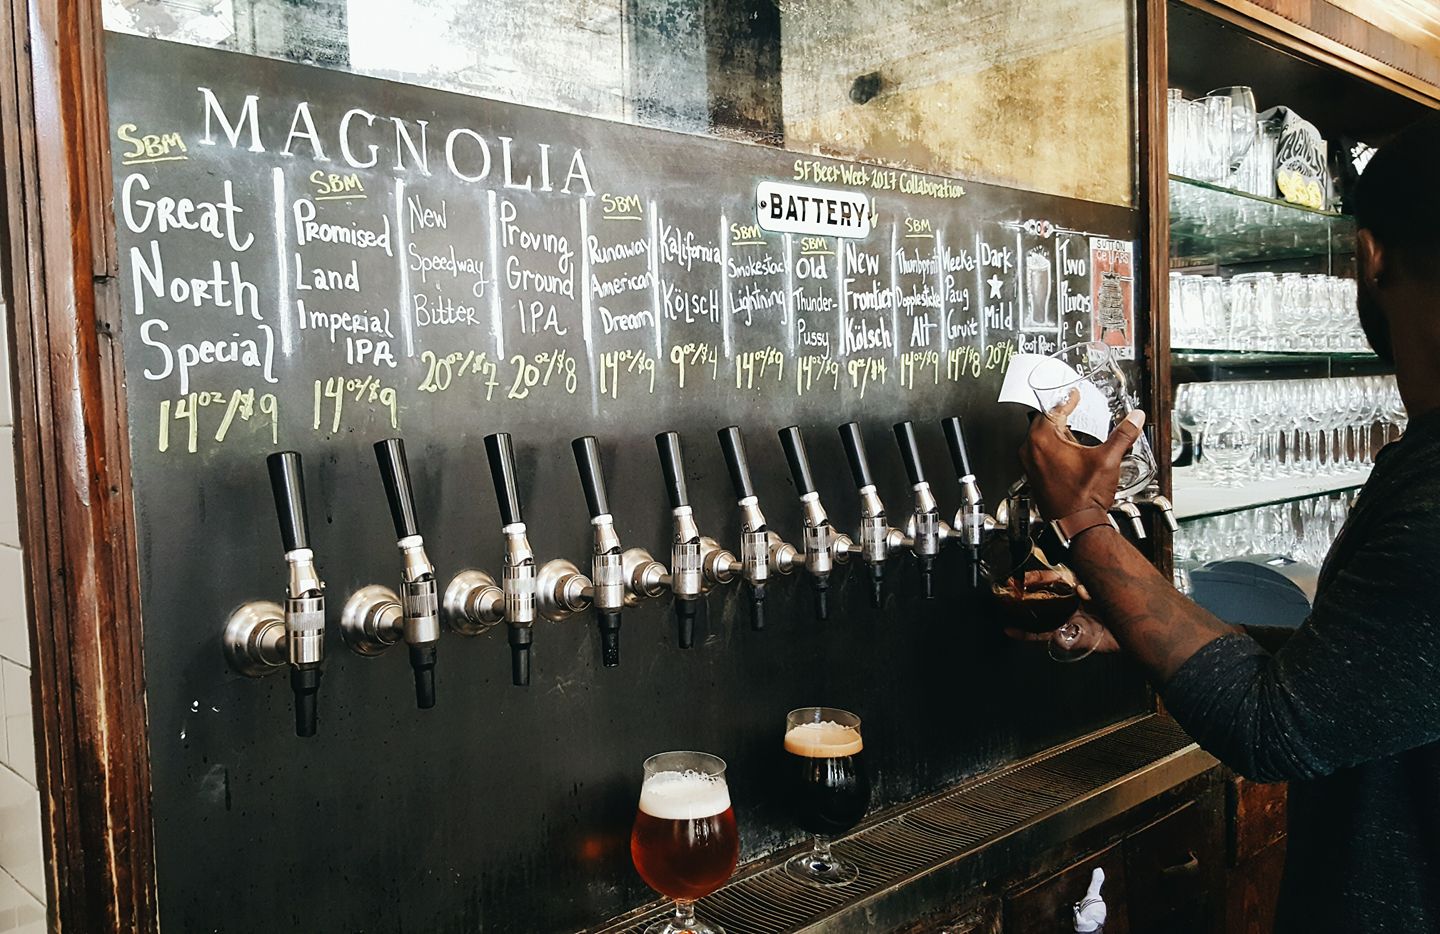 The taps at Magnolia Brewery